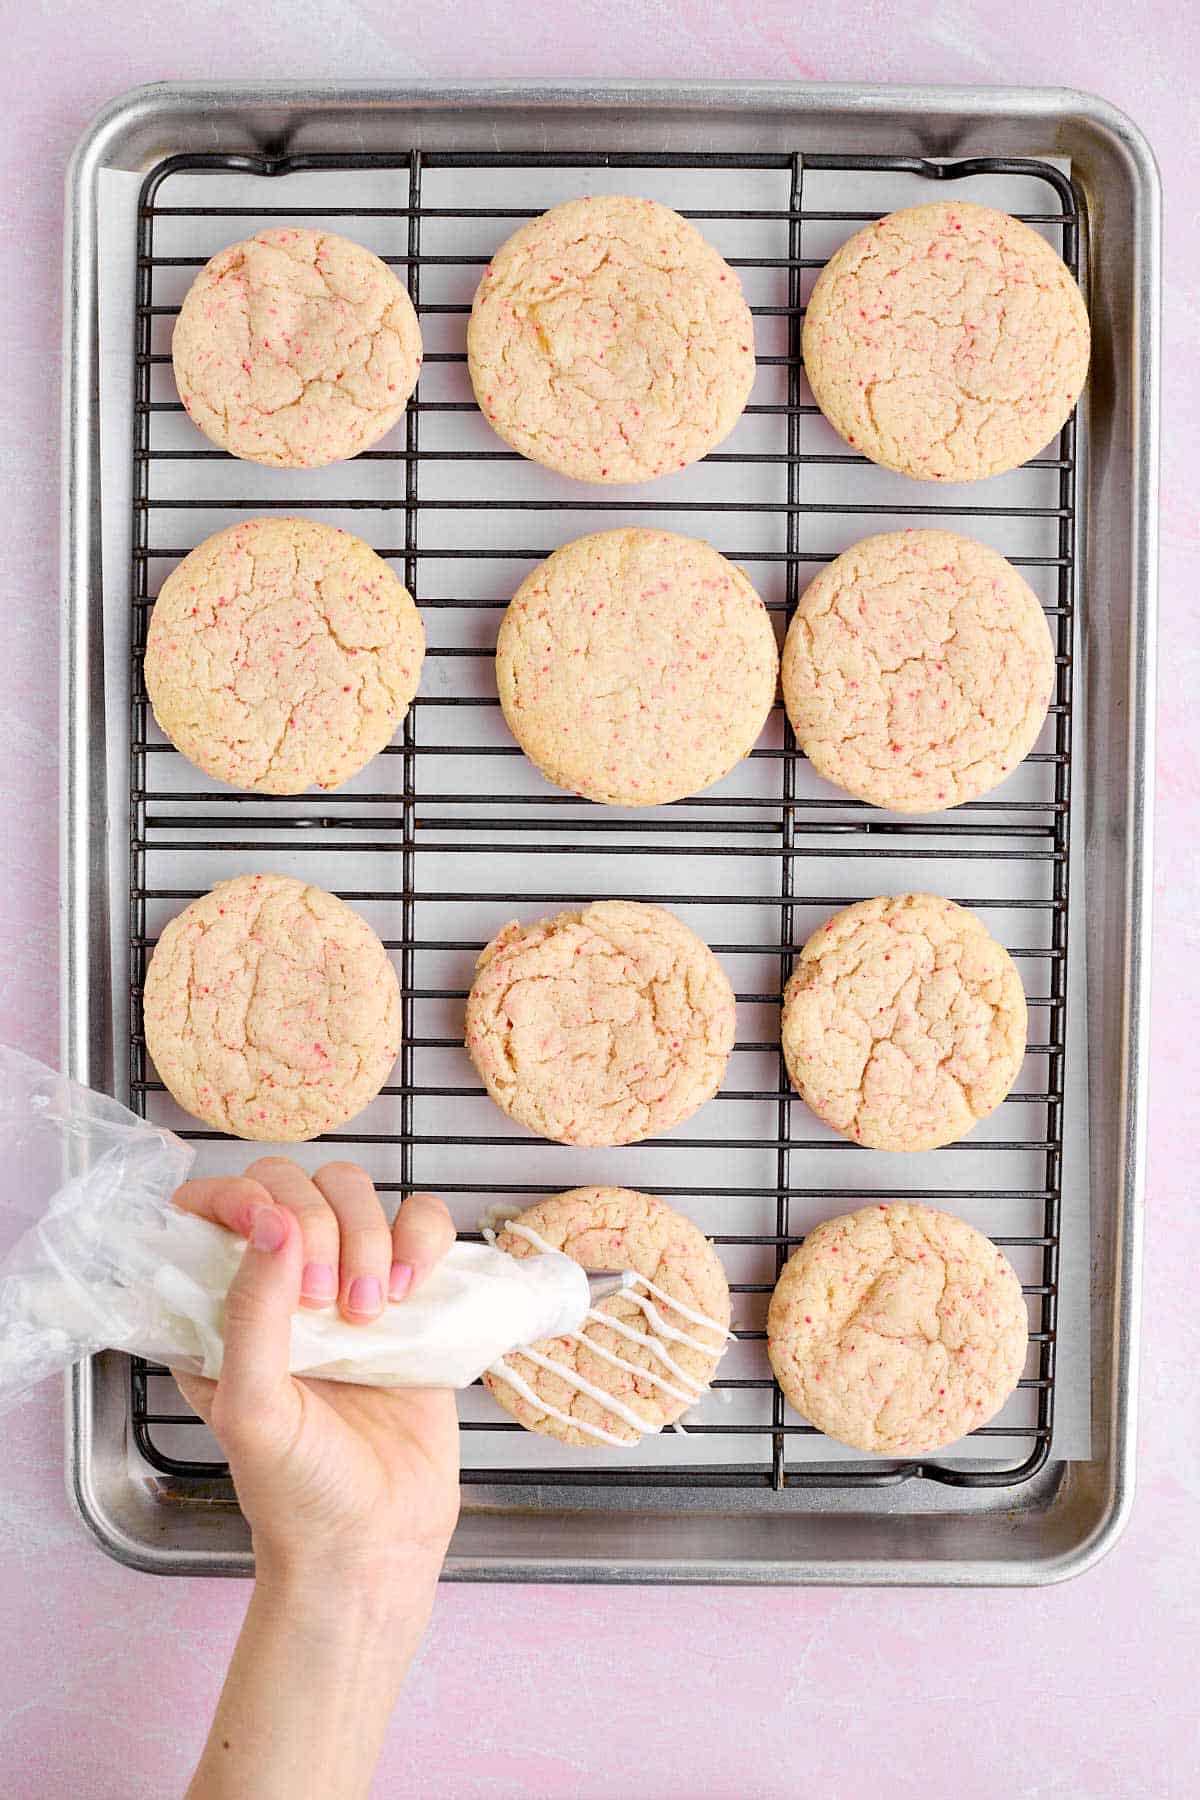 Drizzling melted white chocolate on cherry chip cookies.